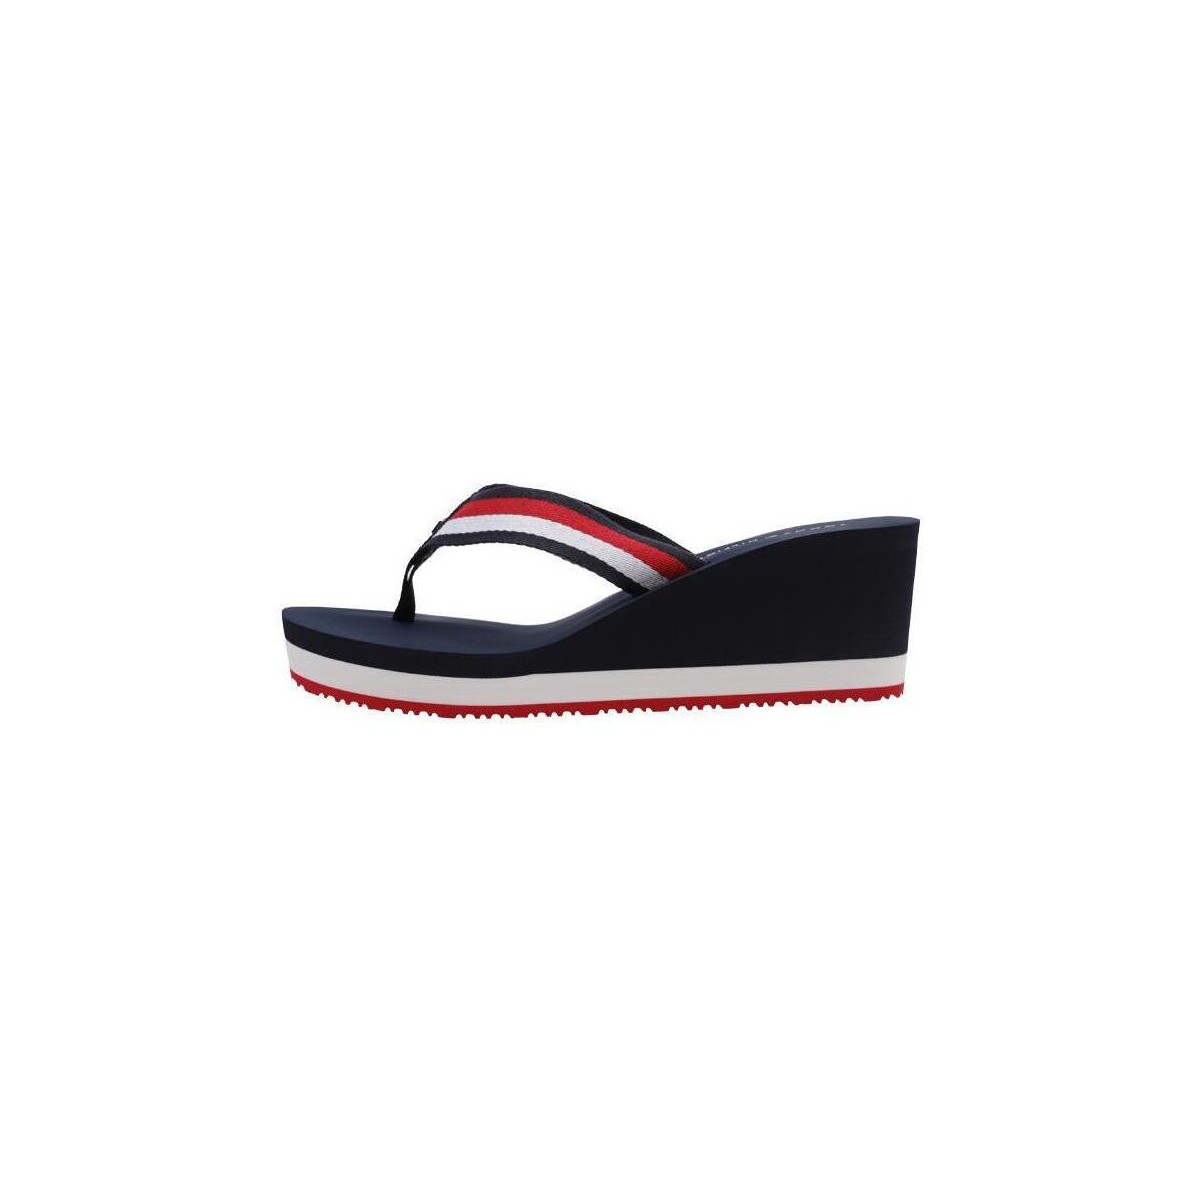 Zapatos Mujer Chanclas Tommy Hilfiger CORPORATE WEDGE BEACH SANDAL Marino